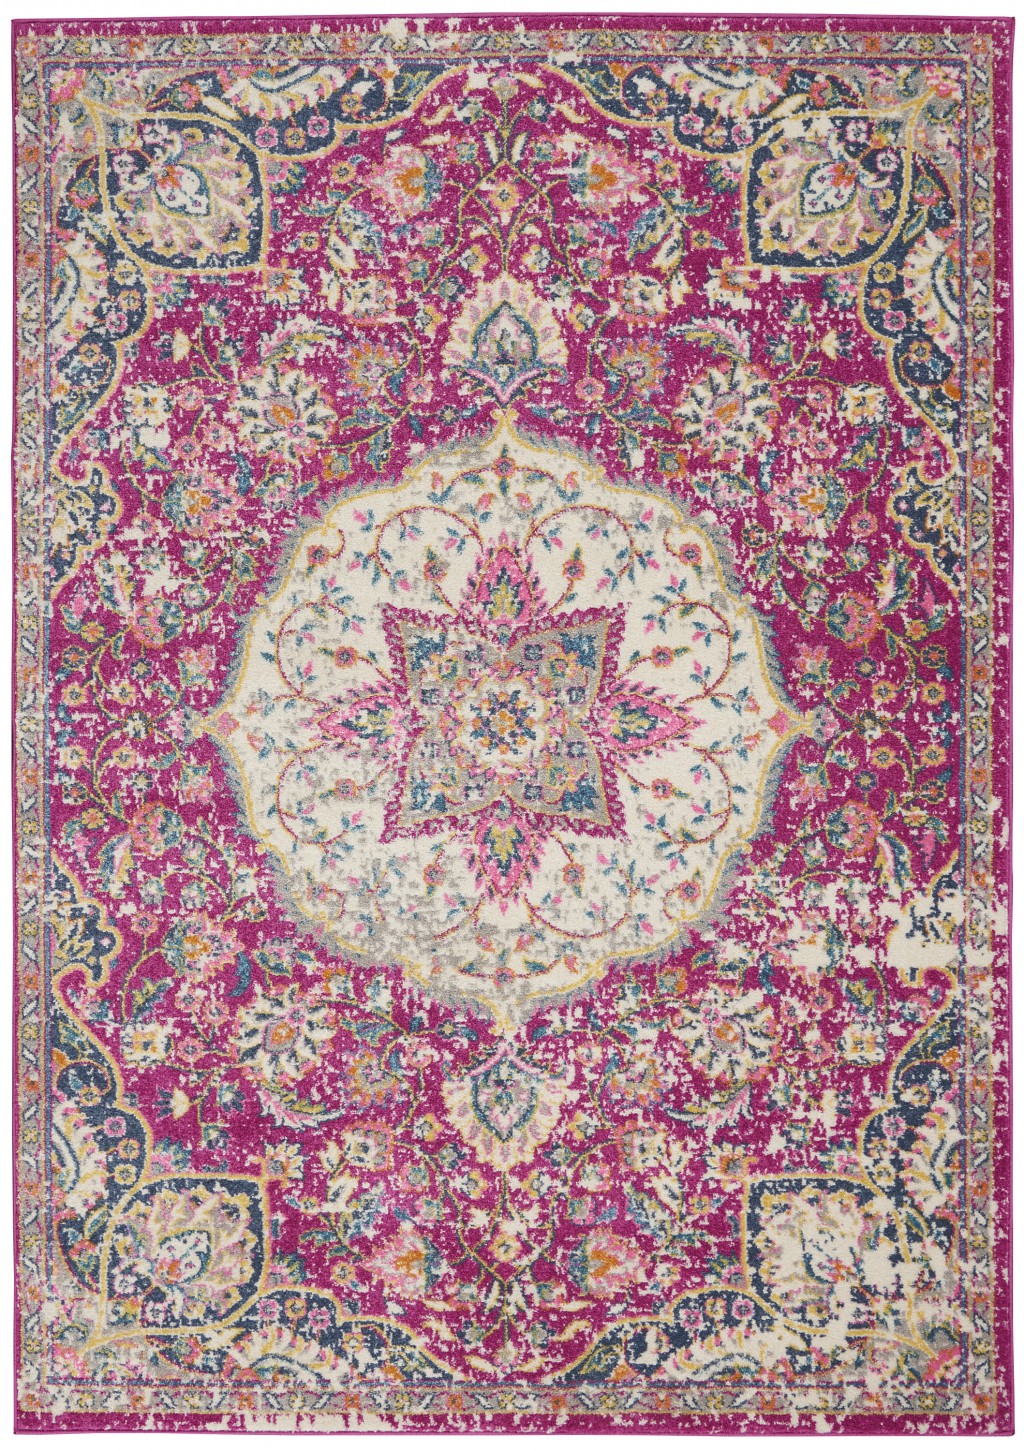 5' X 7' Pink Dhurrie Area Rug-385541-1